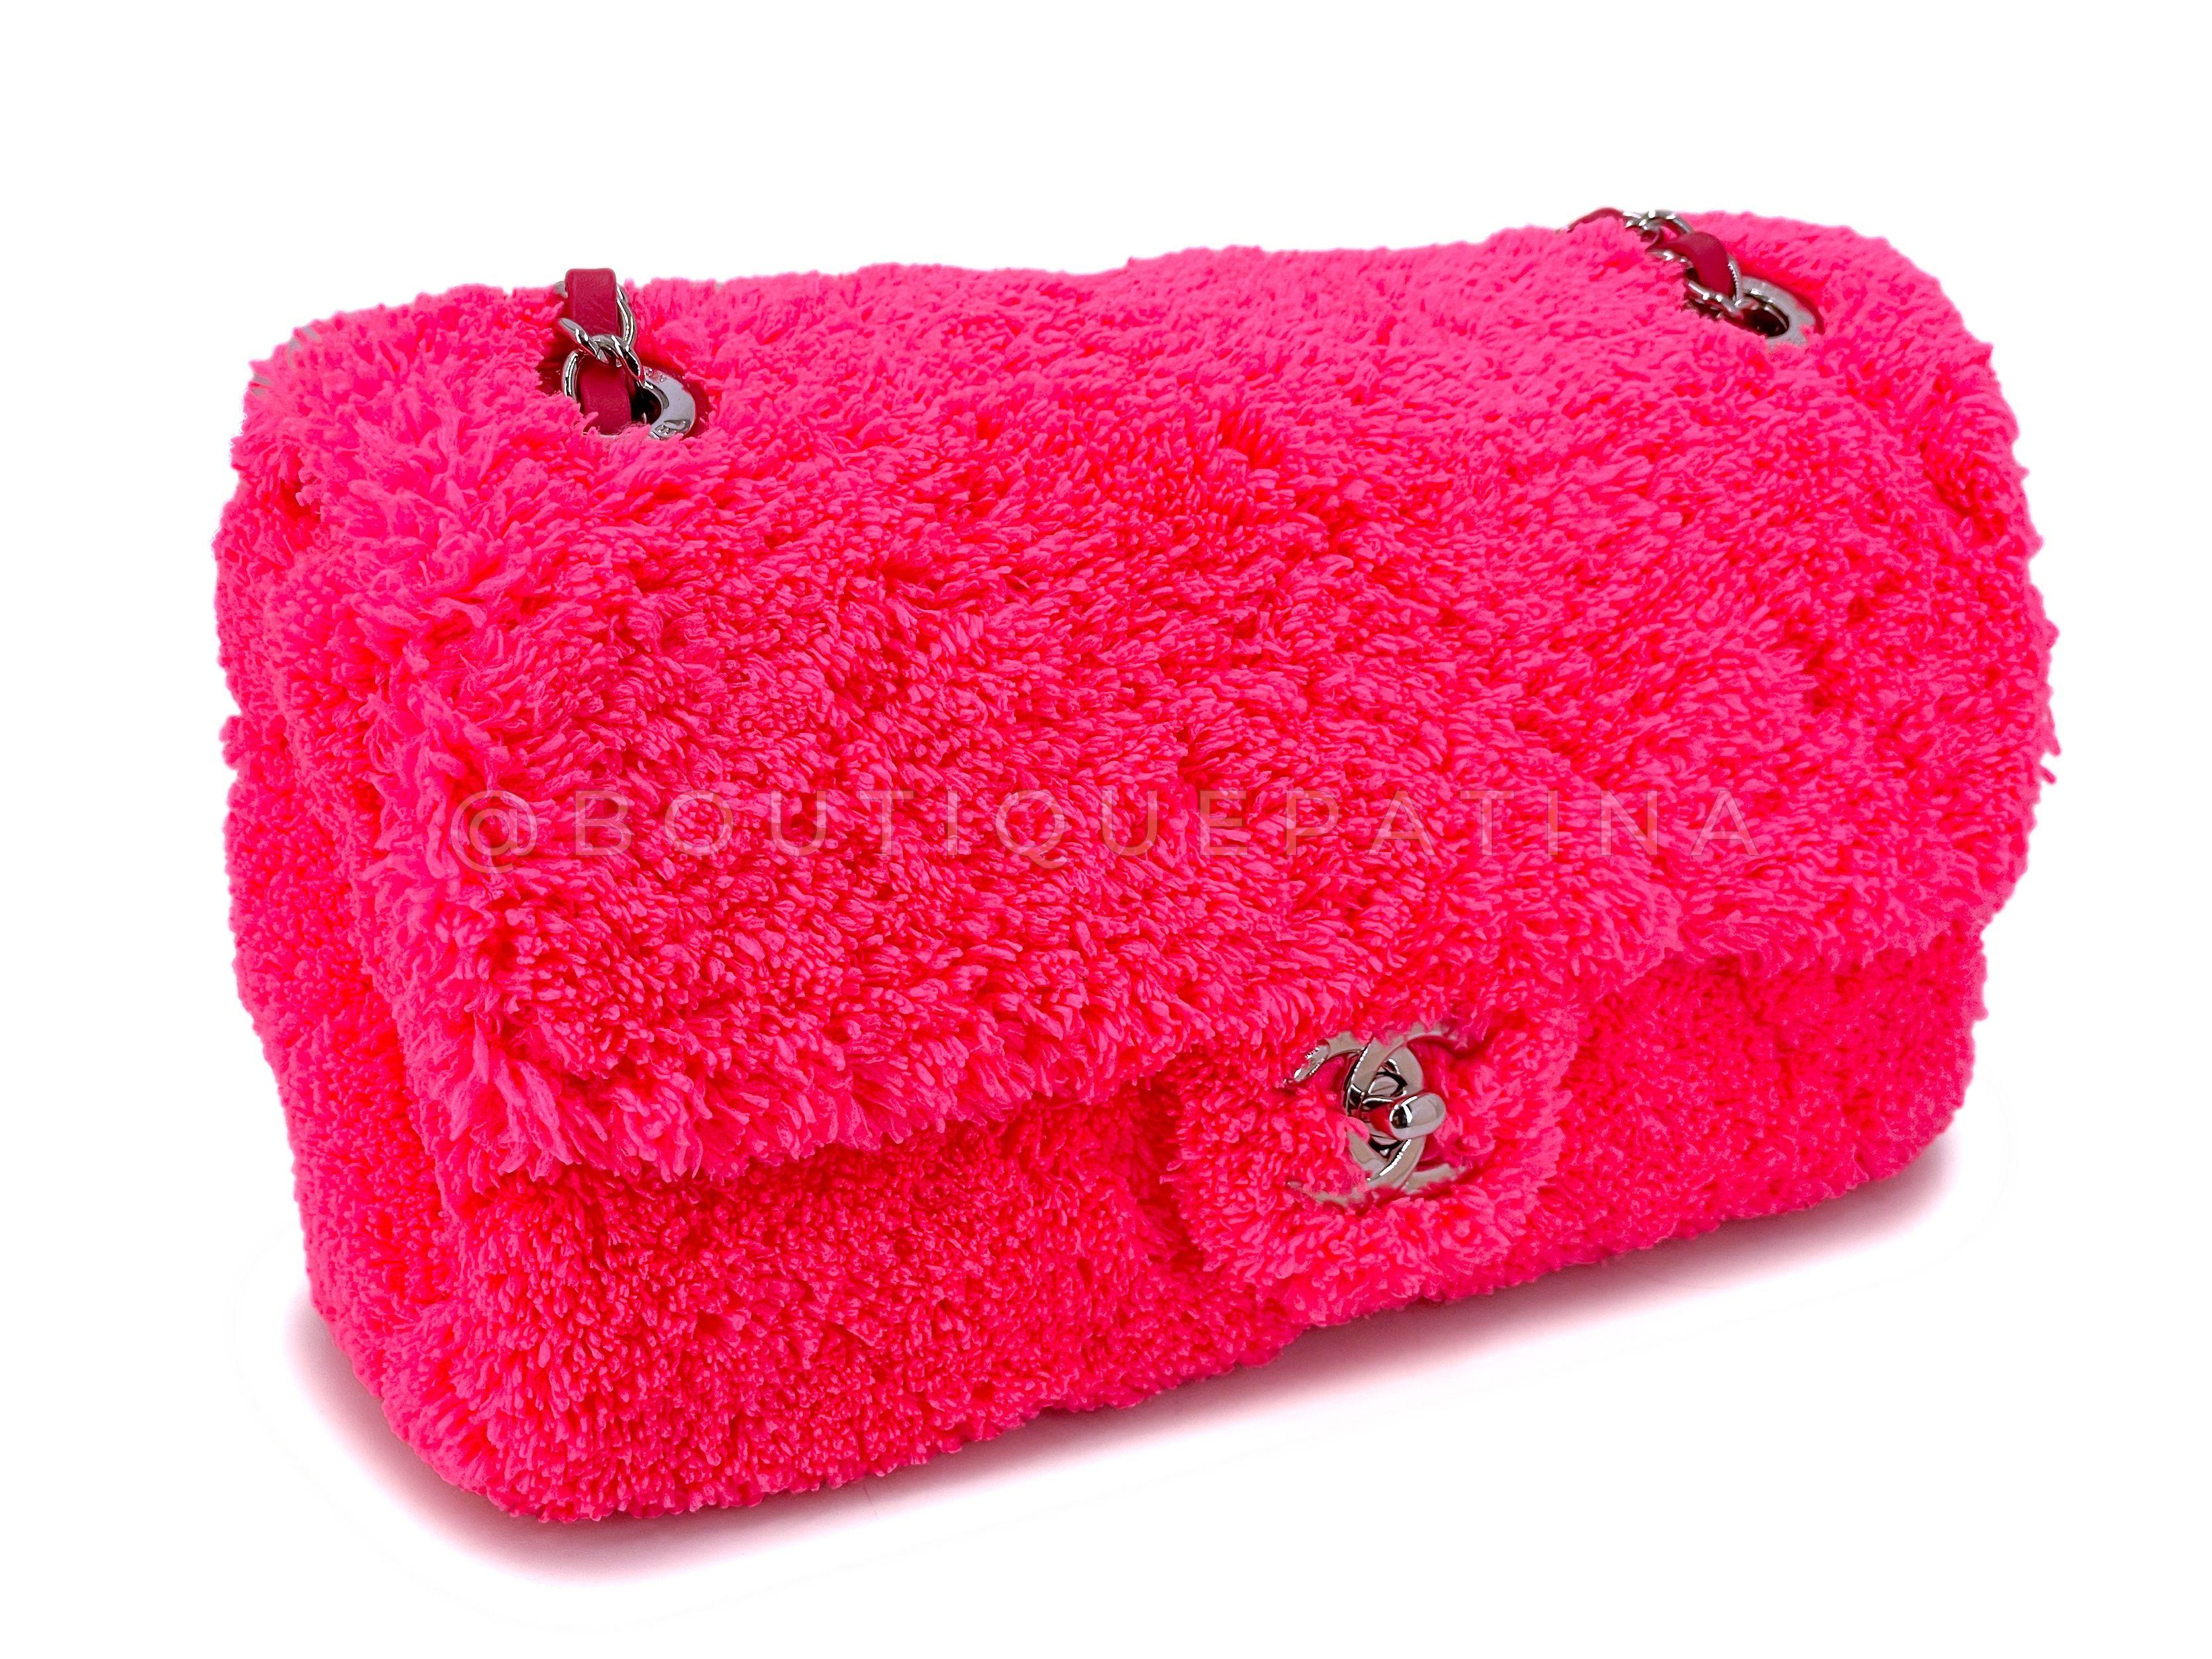 Chanel Neon Pink Terry Fur Flap Bag 67683 In Excellent Condition For Sale In Costa Mesa, CA